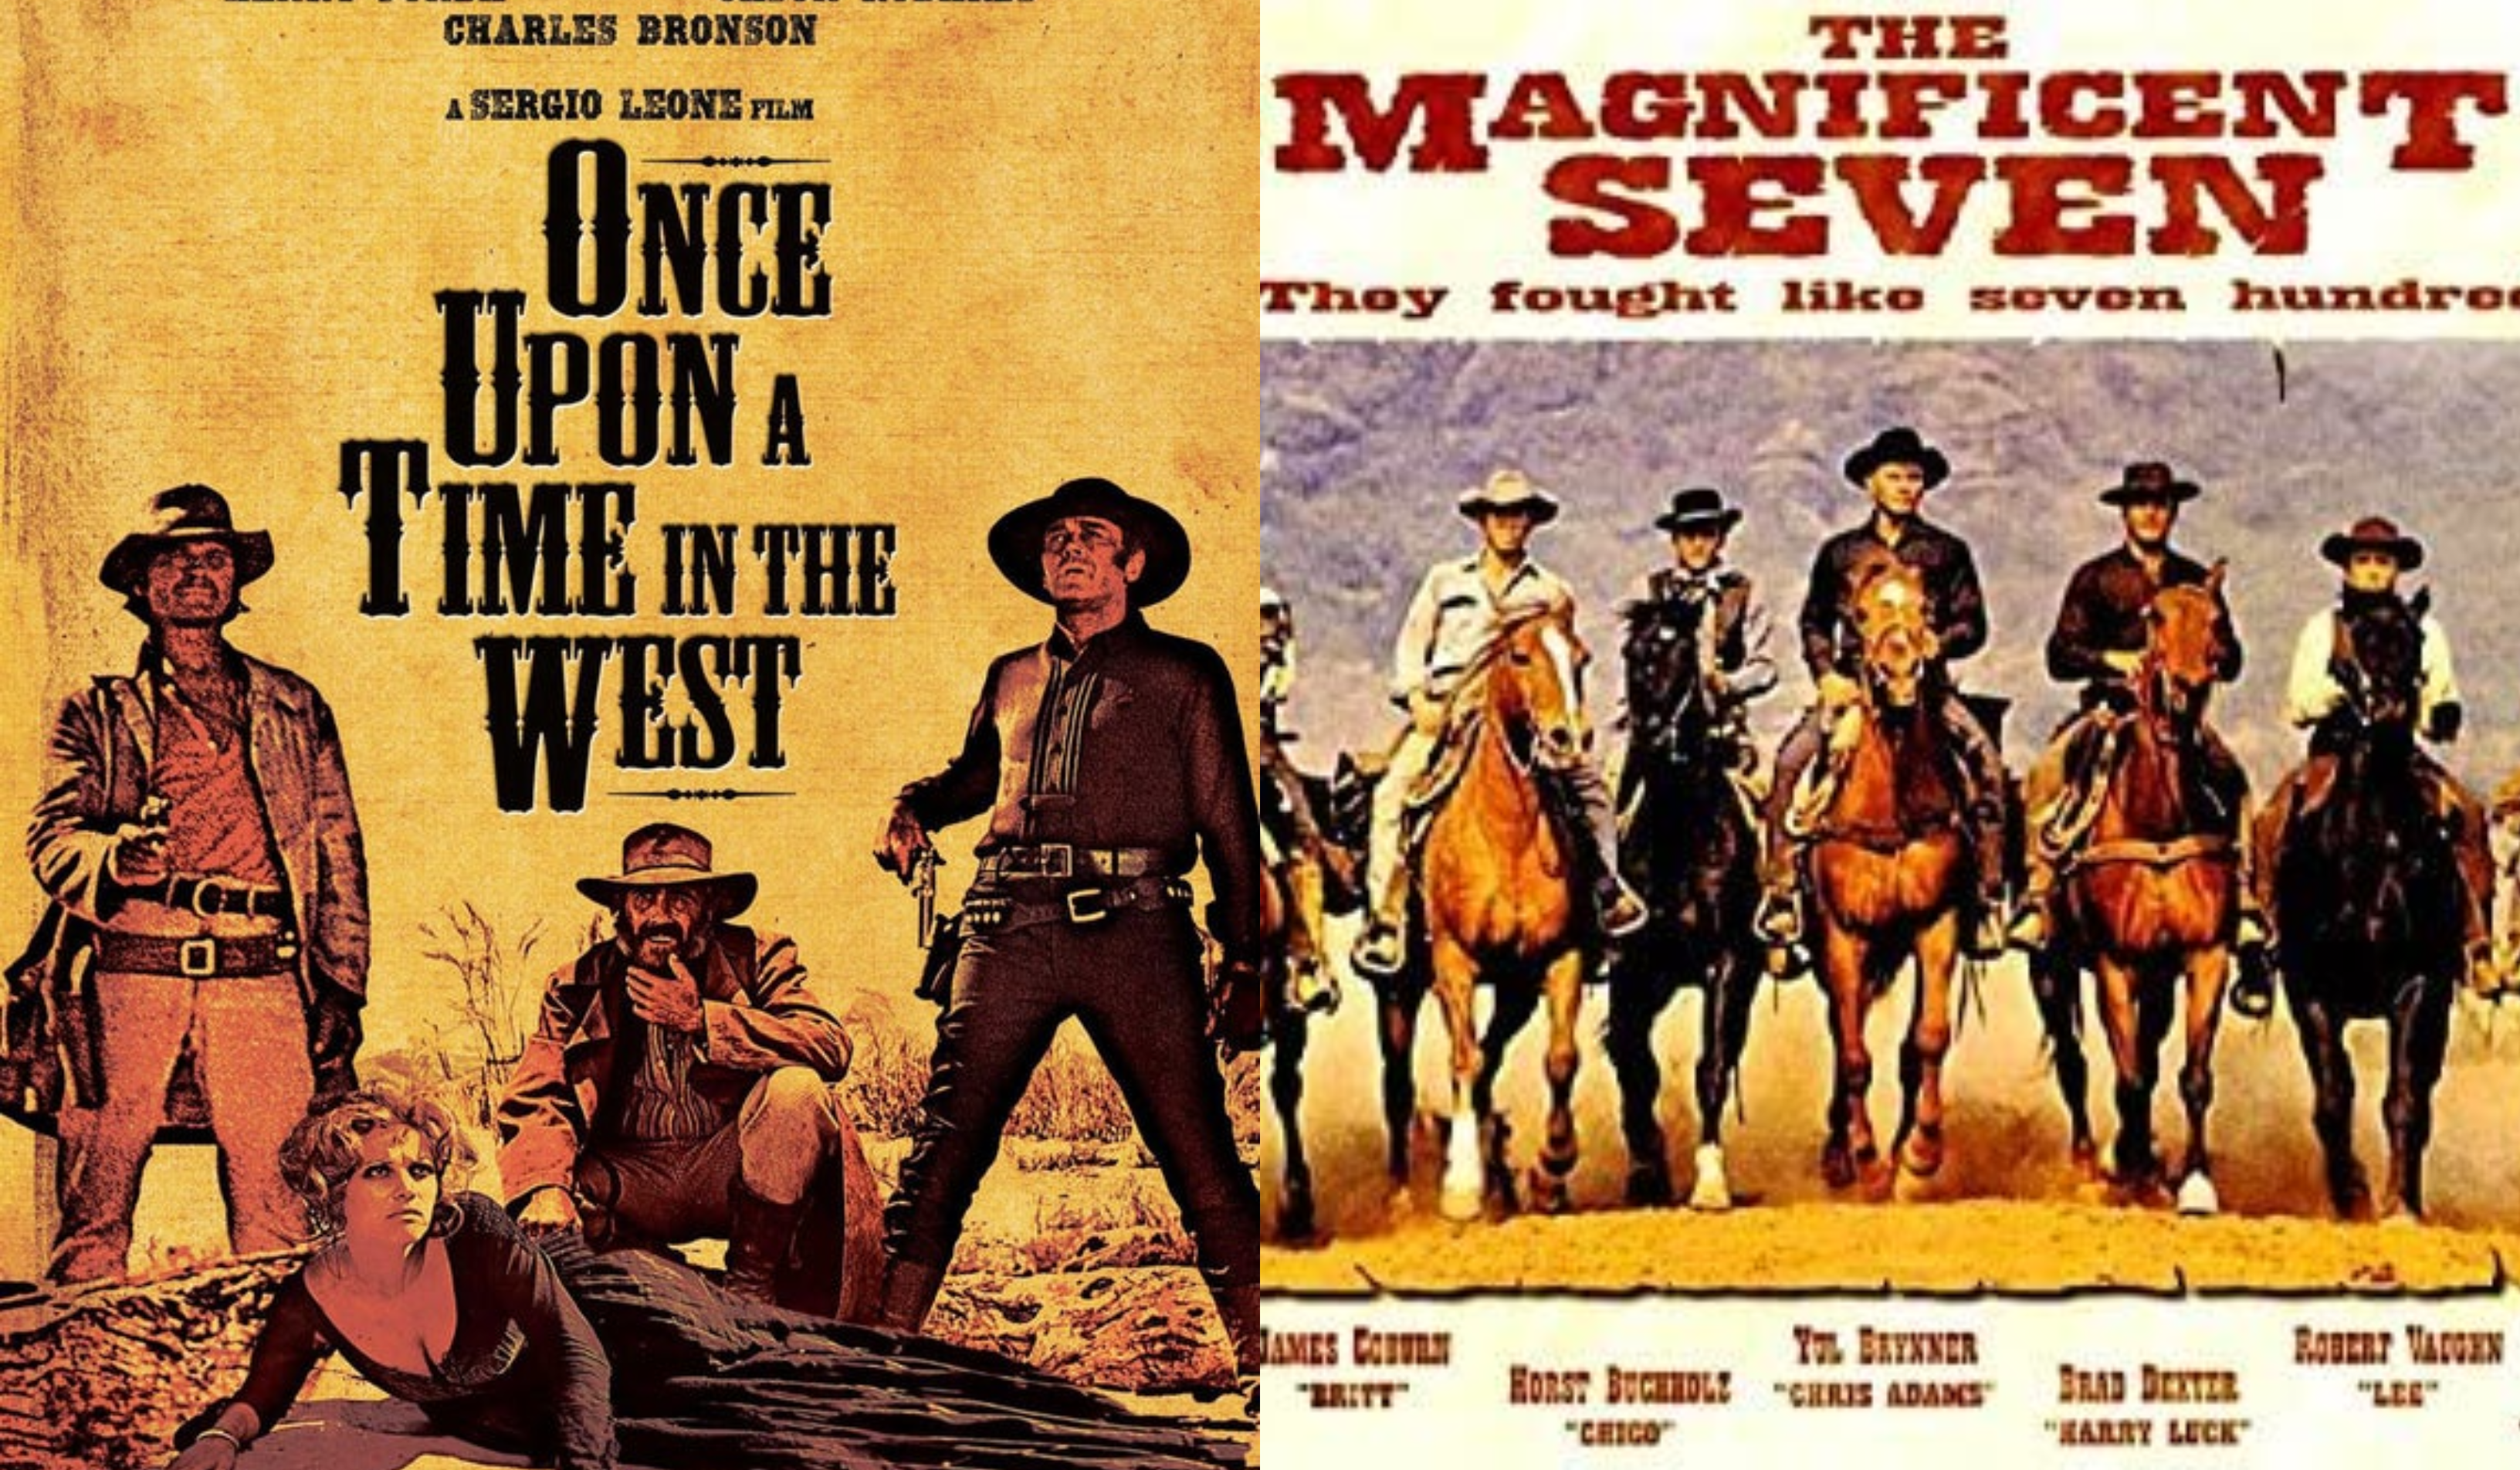 Once Upon A Time In The West and The Magnificent Seven